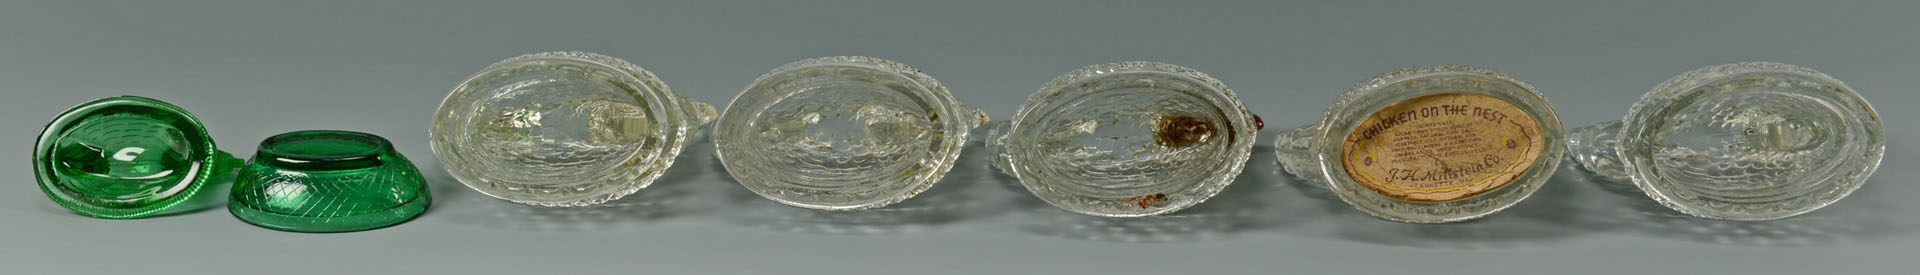 Lot 664: 29 American Glass Candy Containers